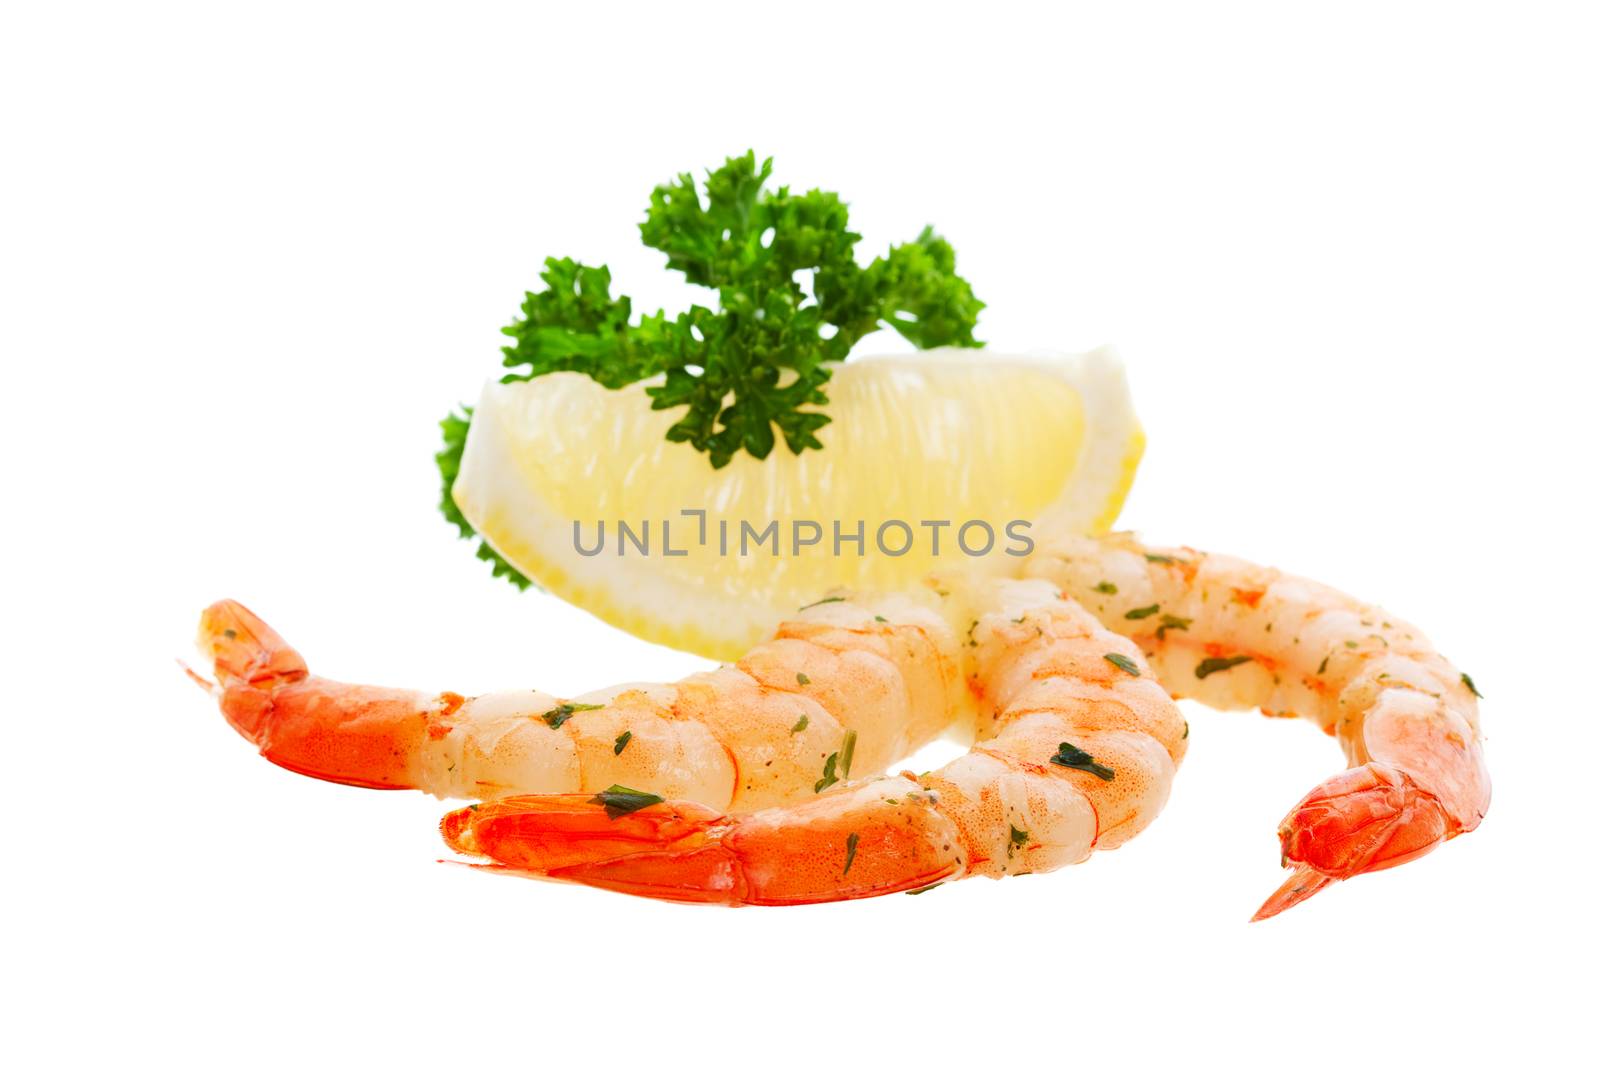 Three delicious shrimp with a lemon wedge and parsley garnish.